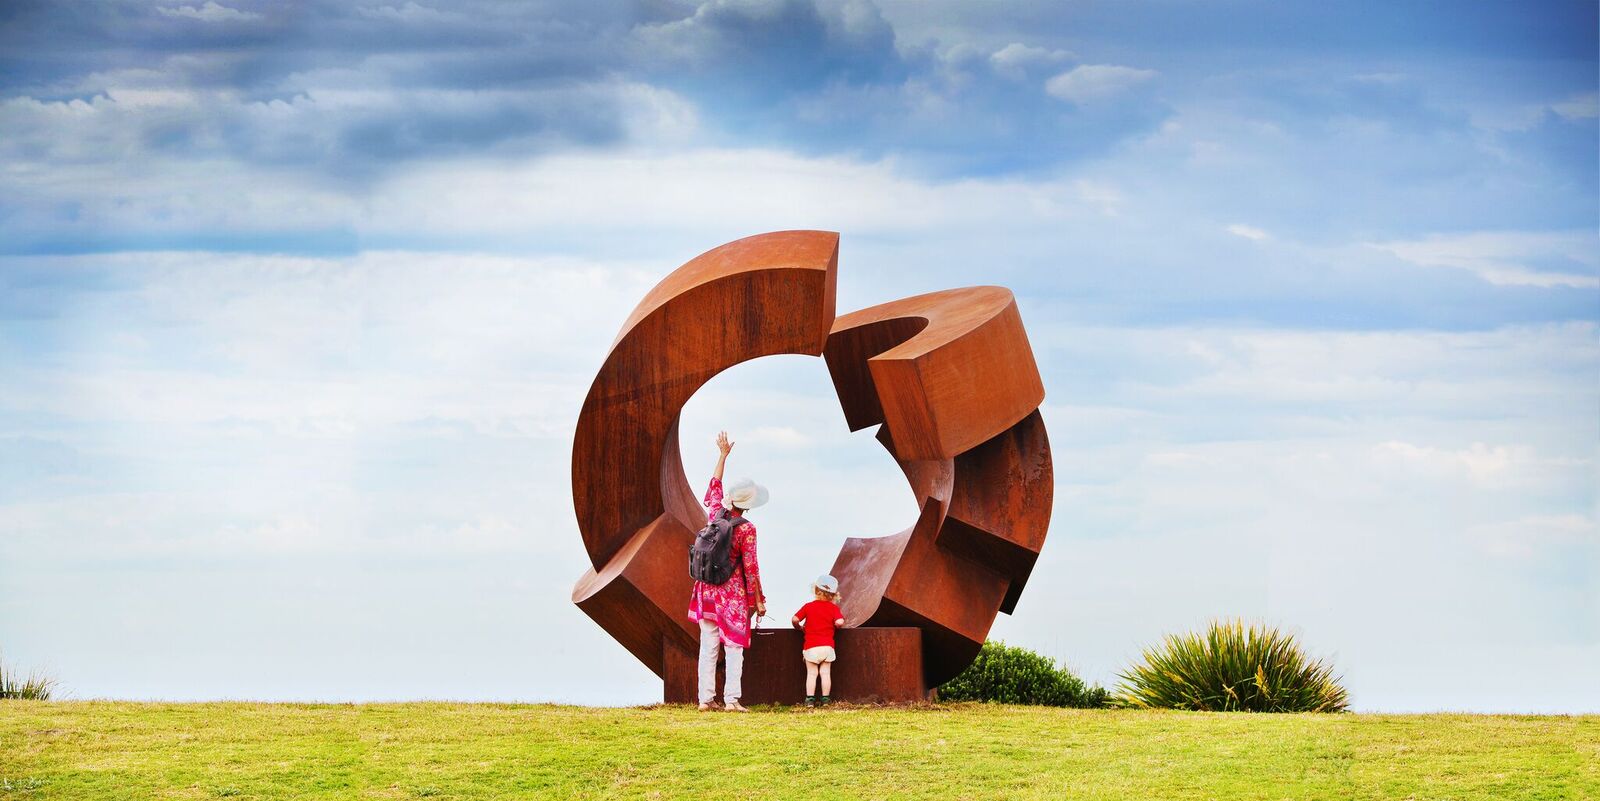 Sculpture By Sea is the perfect outing for the whole family